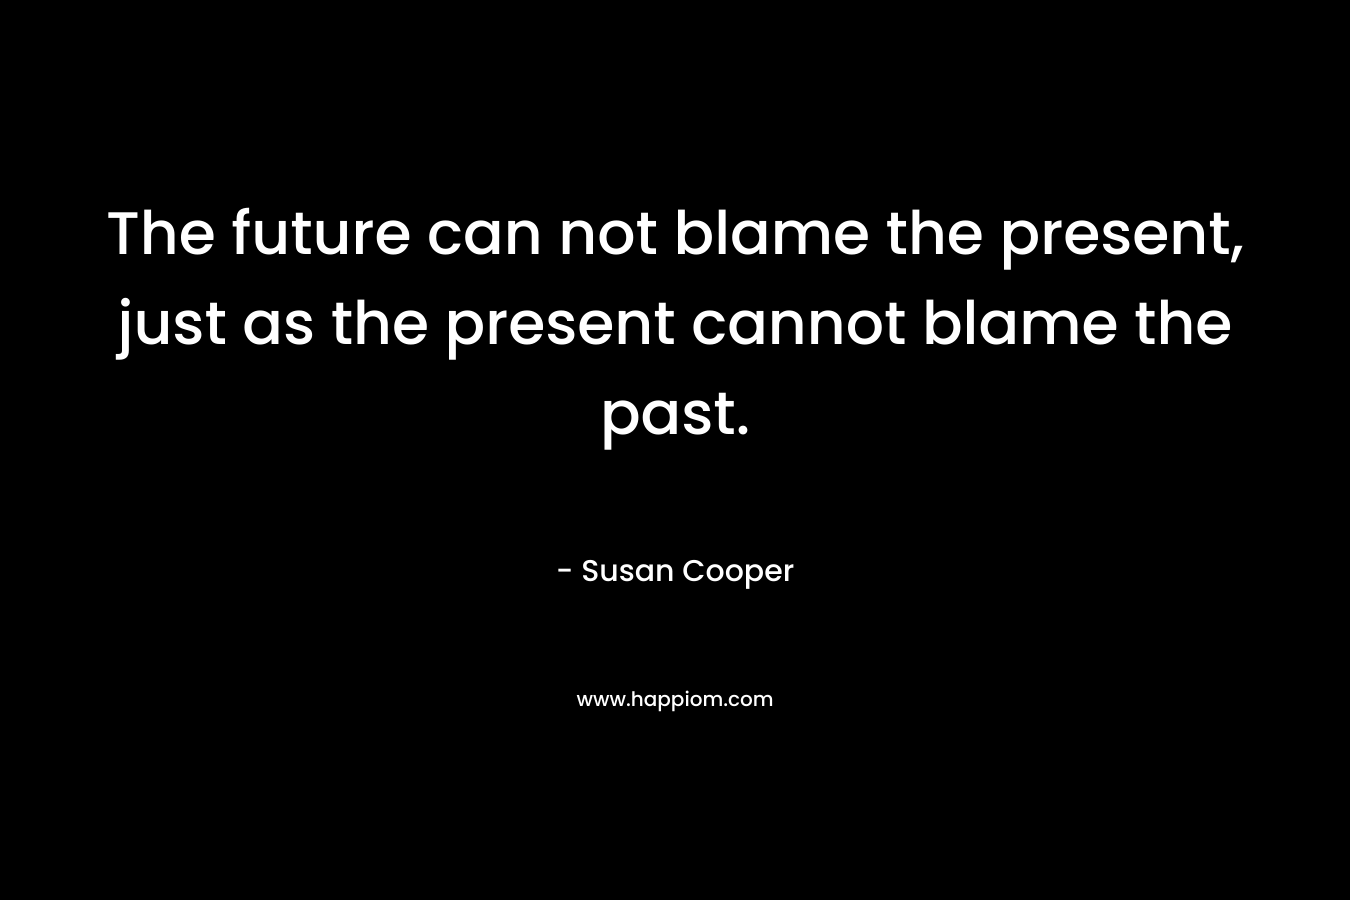 The future can not blame the present, just as the present cannot blame the past. – Susan Cooper